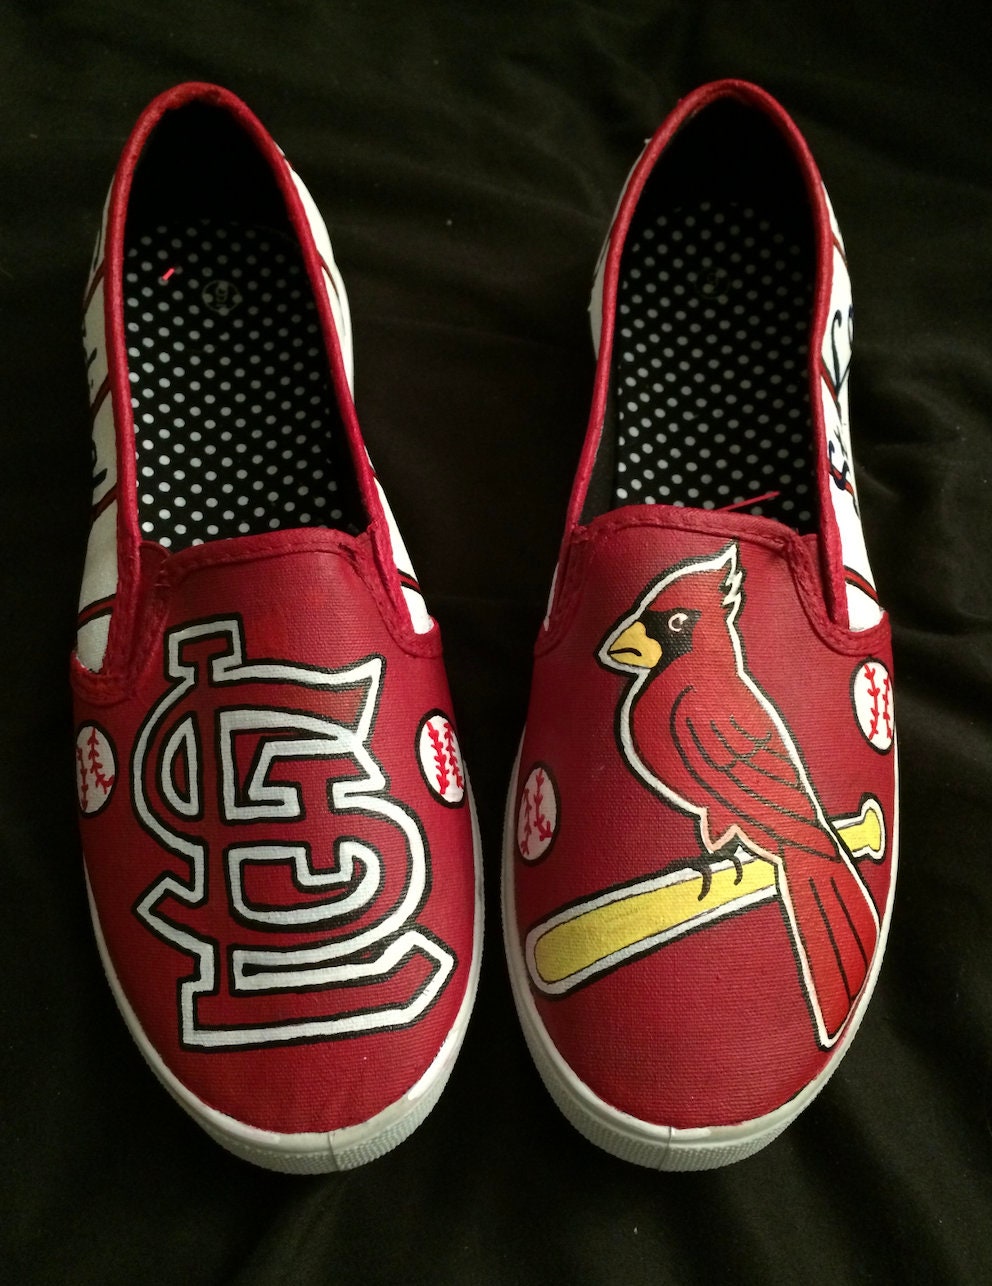 MLB St. Louis Cardinals Red Yeezy Shoes Men And Women Gift For Fans -  Freedomdesign